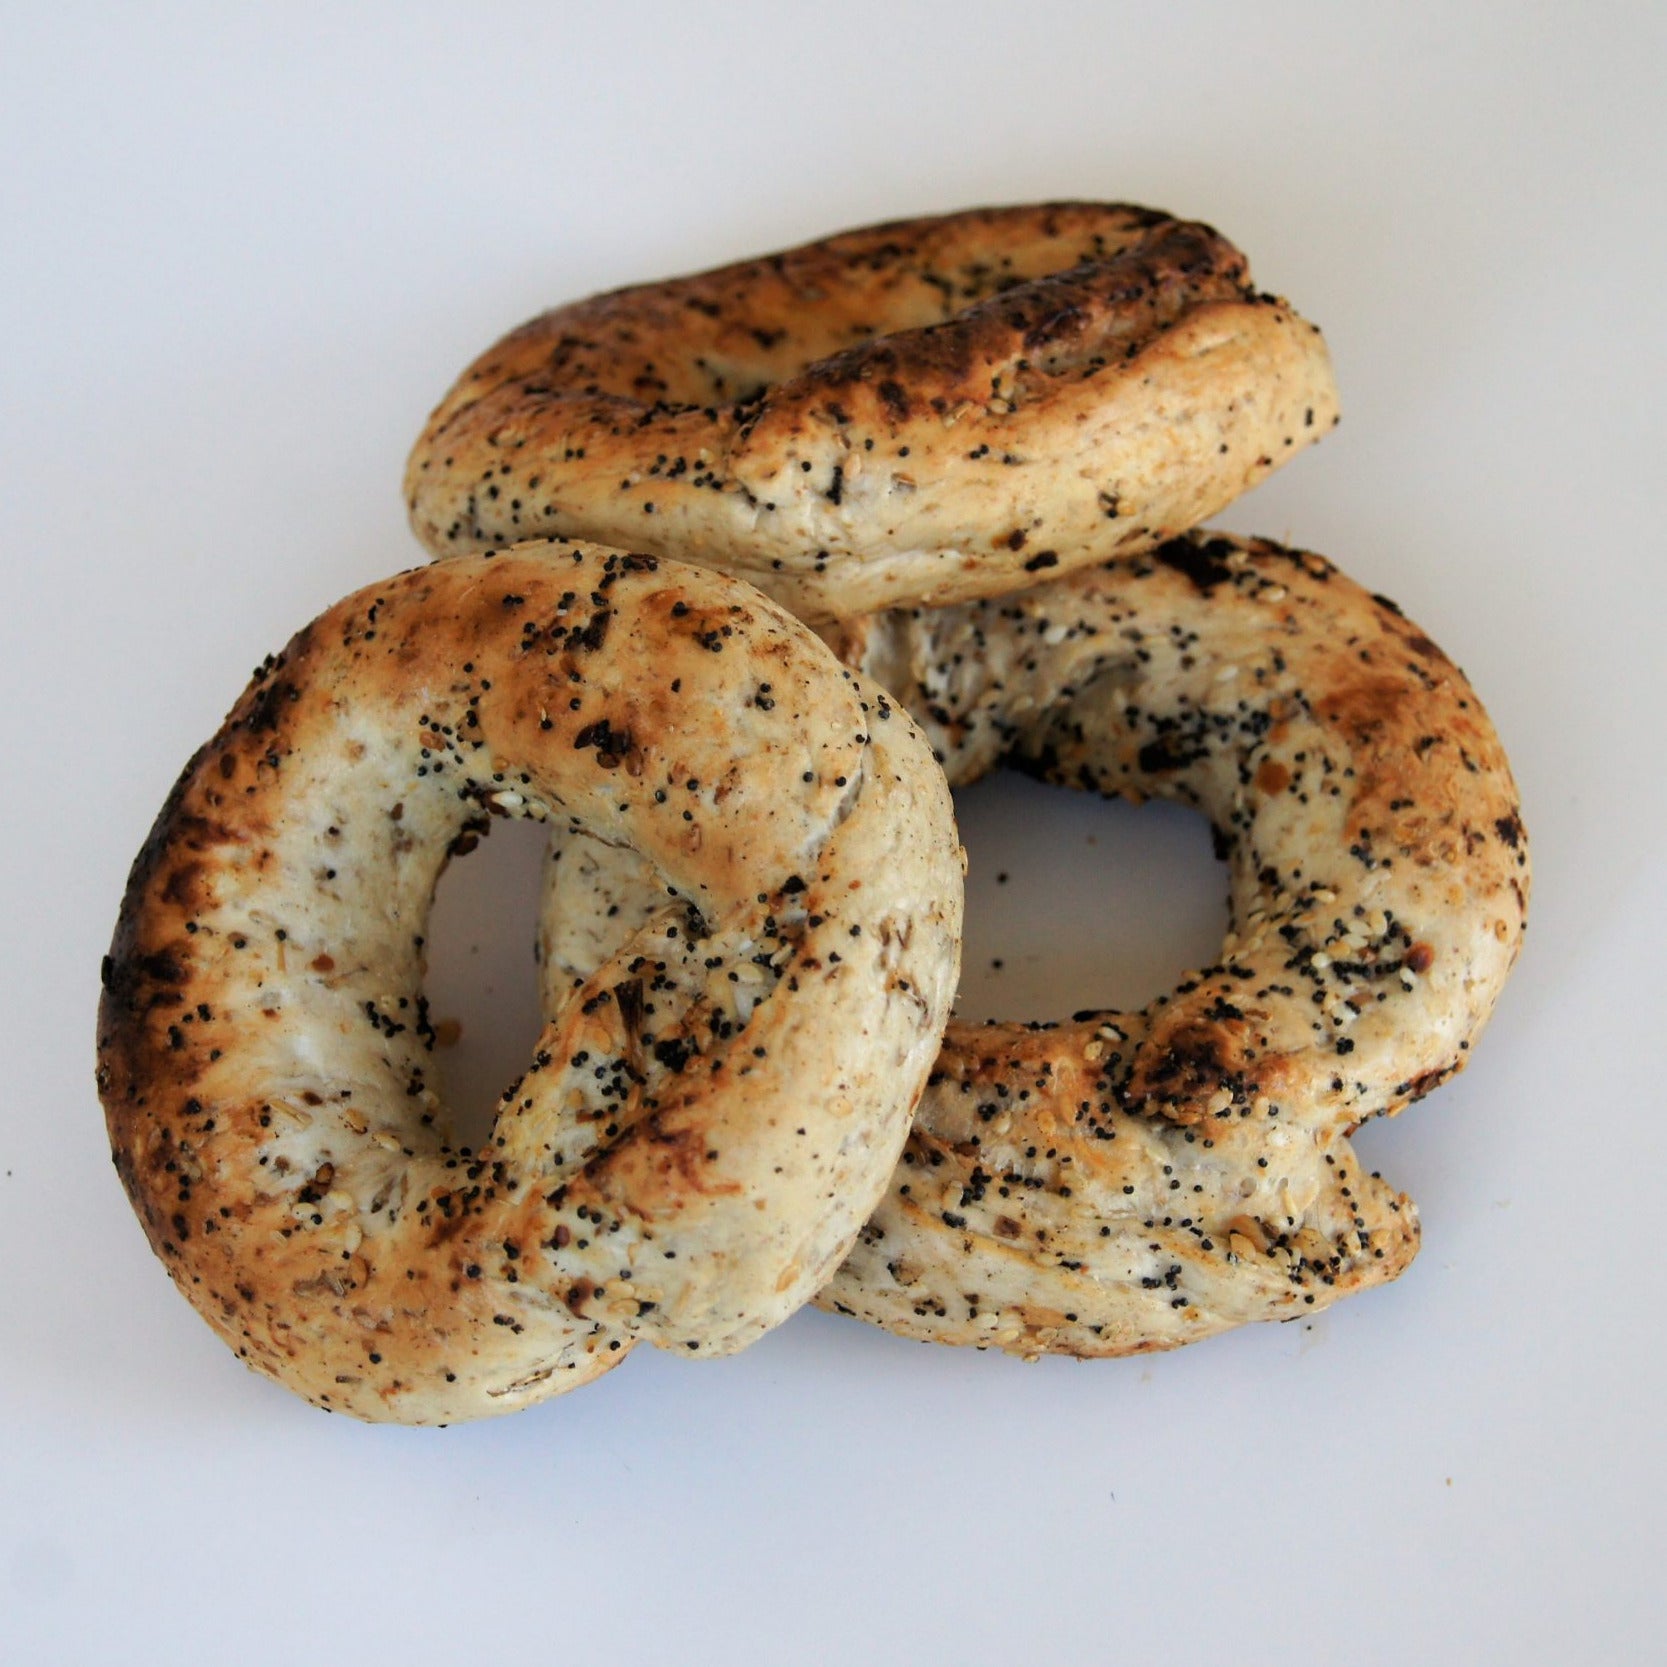 Three Montreal style bagels